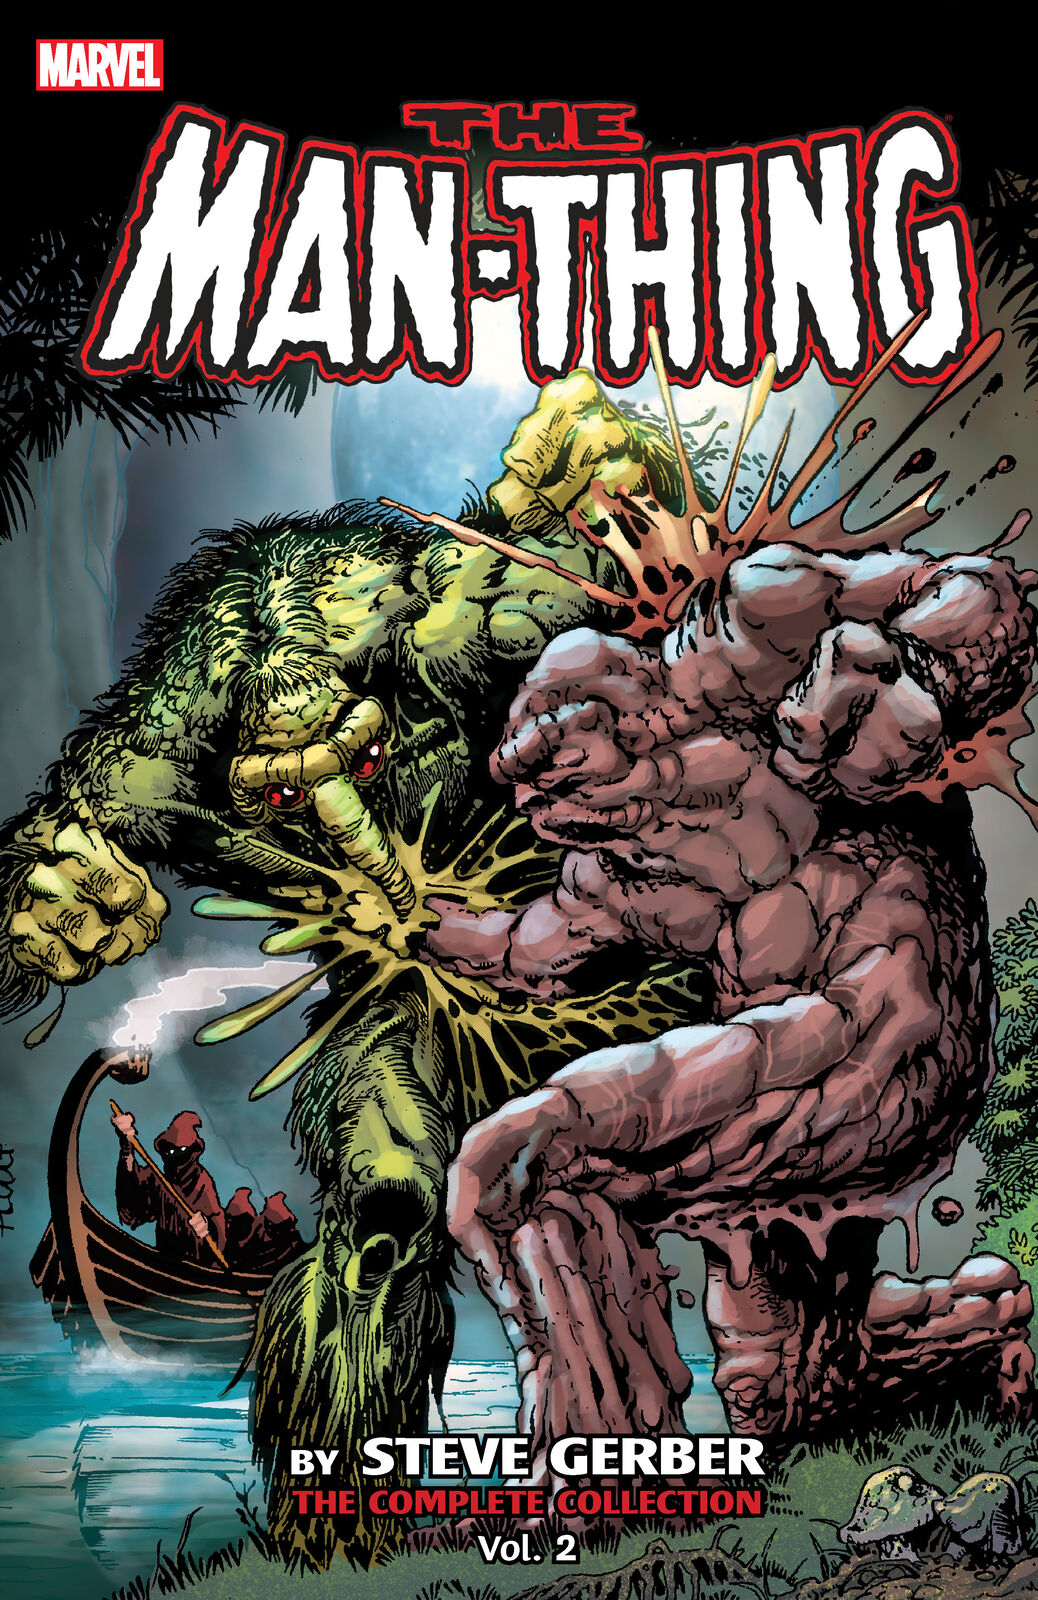 MAN-THING BY STEVE GERBER: THE COMPLETE COLLECTION VOL. 2 (The Man-Thing: The